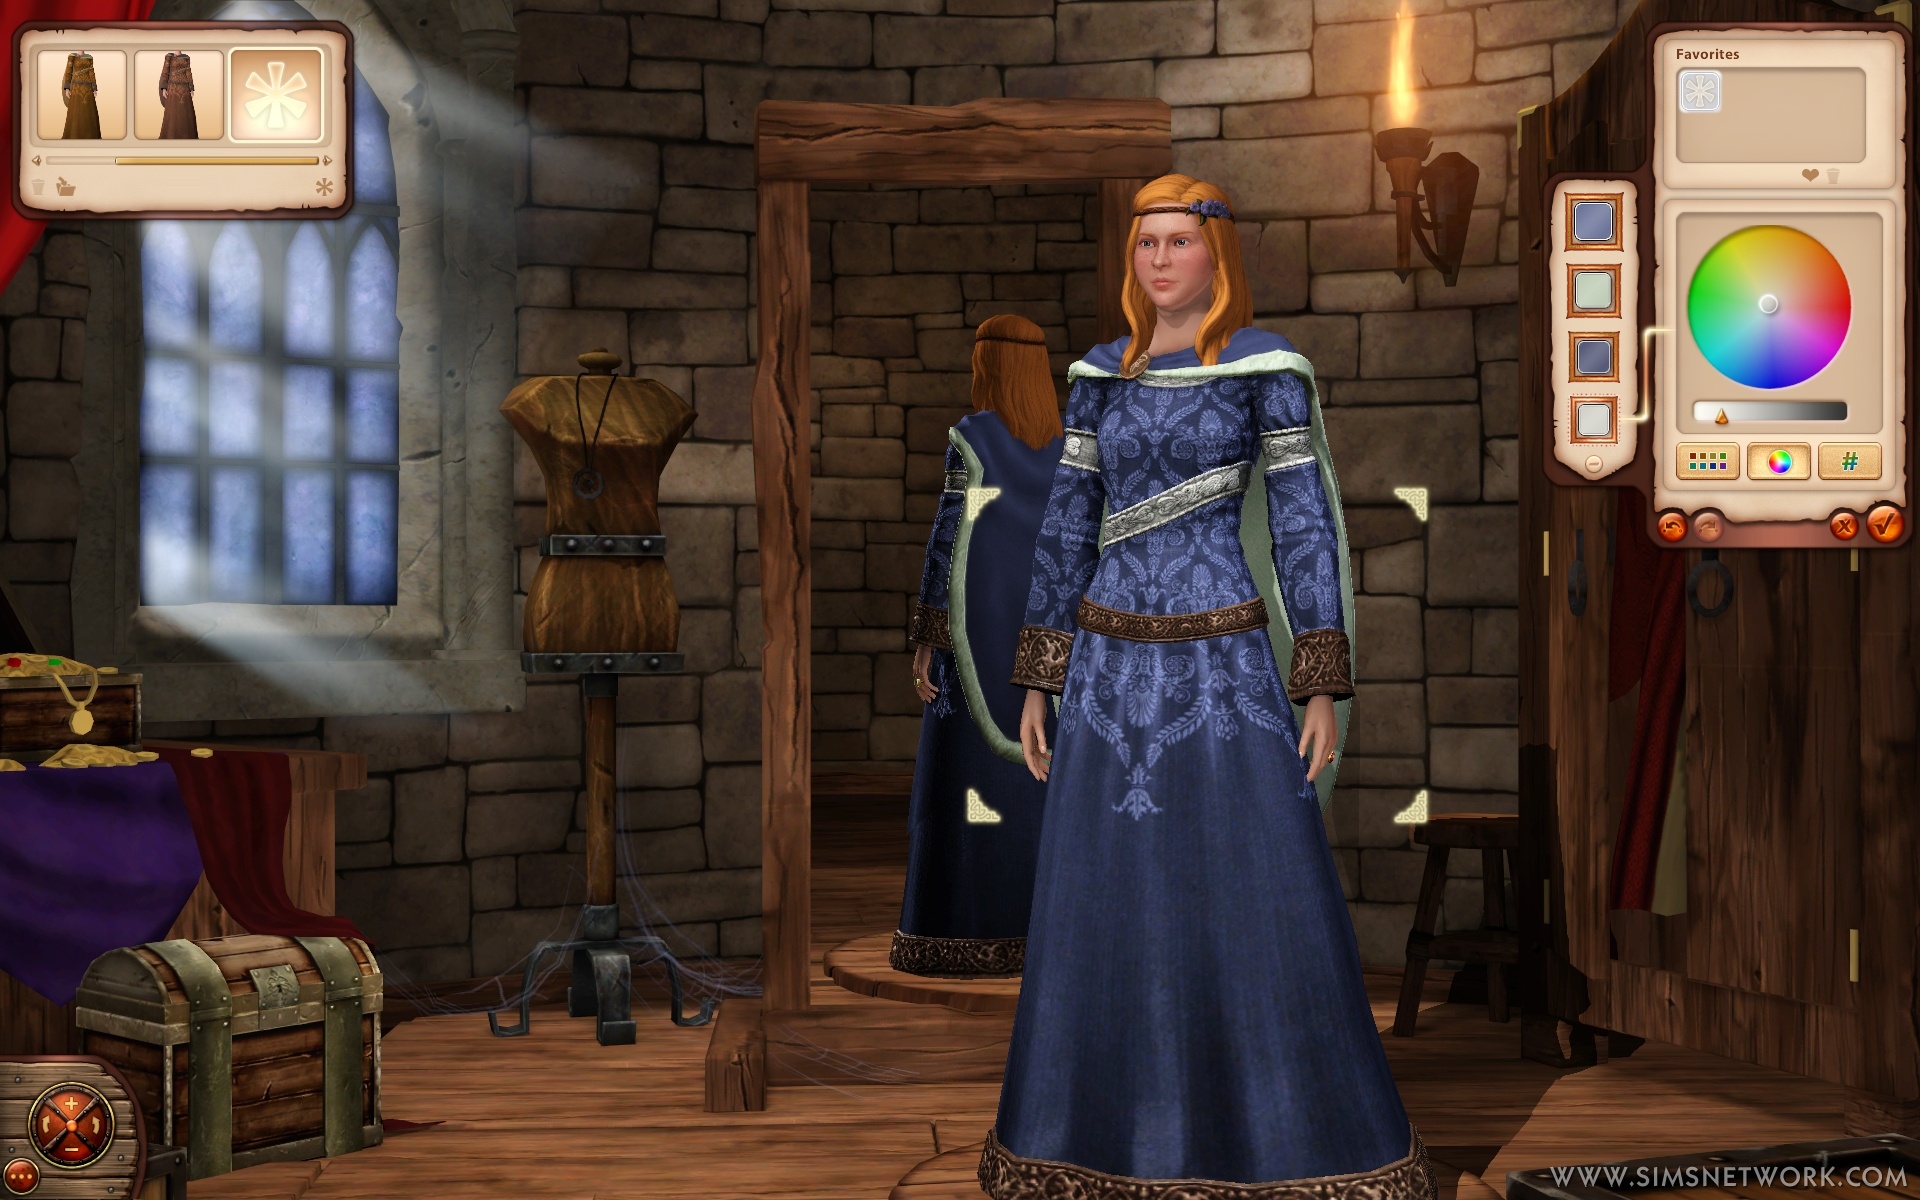 How to install mods in the sims medieval